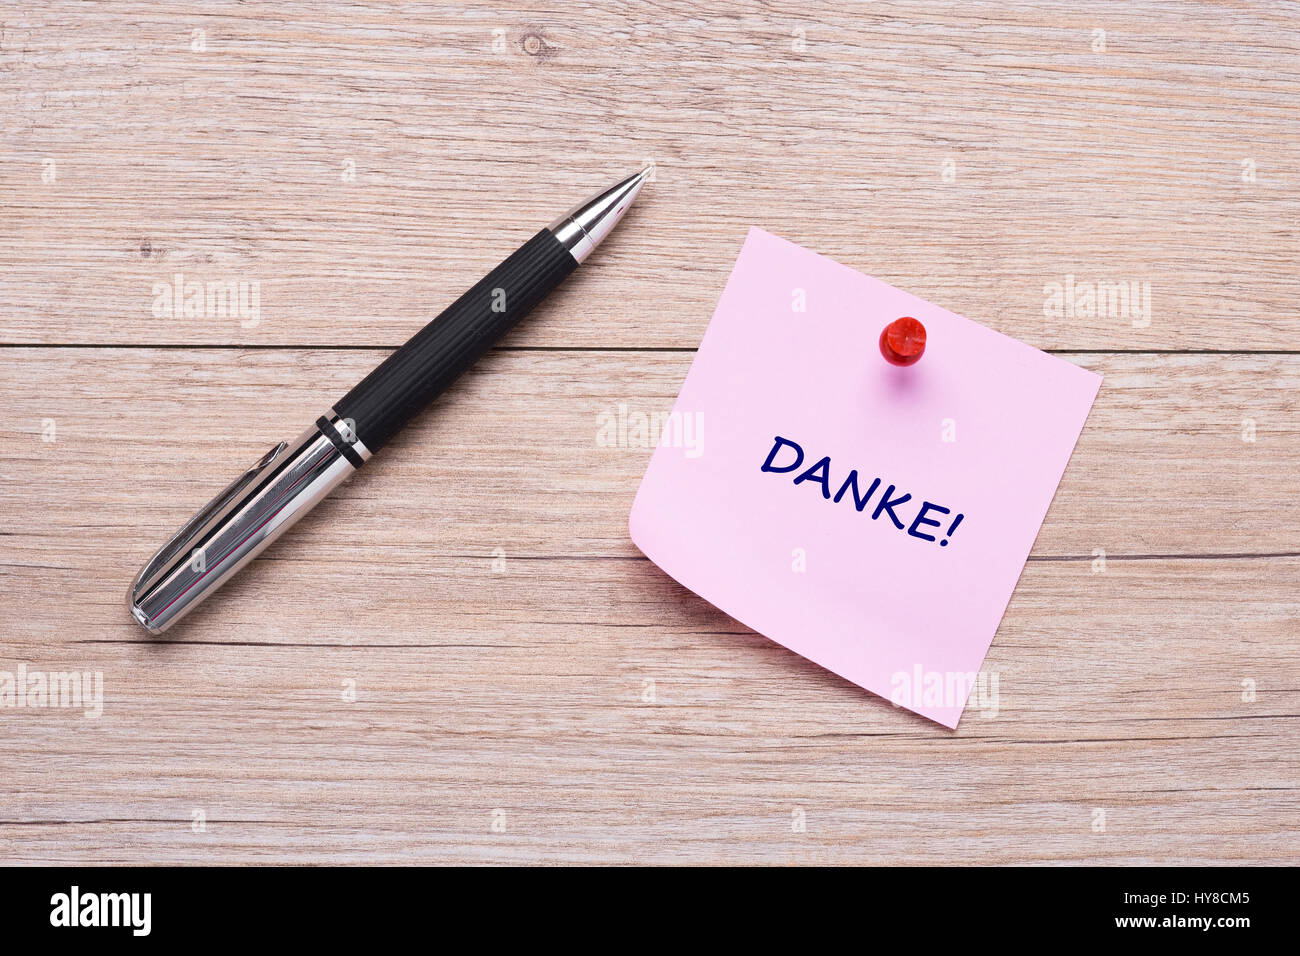 German word "danke" on pink sticky note with red pin as concept Stock Photo